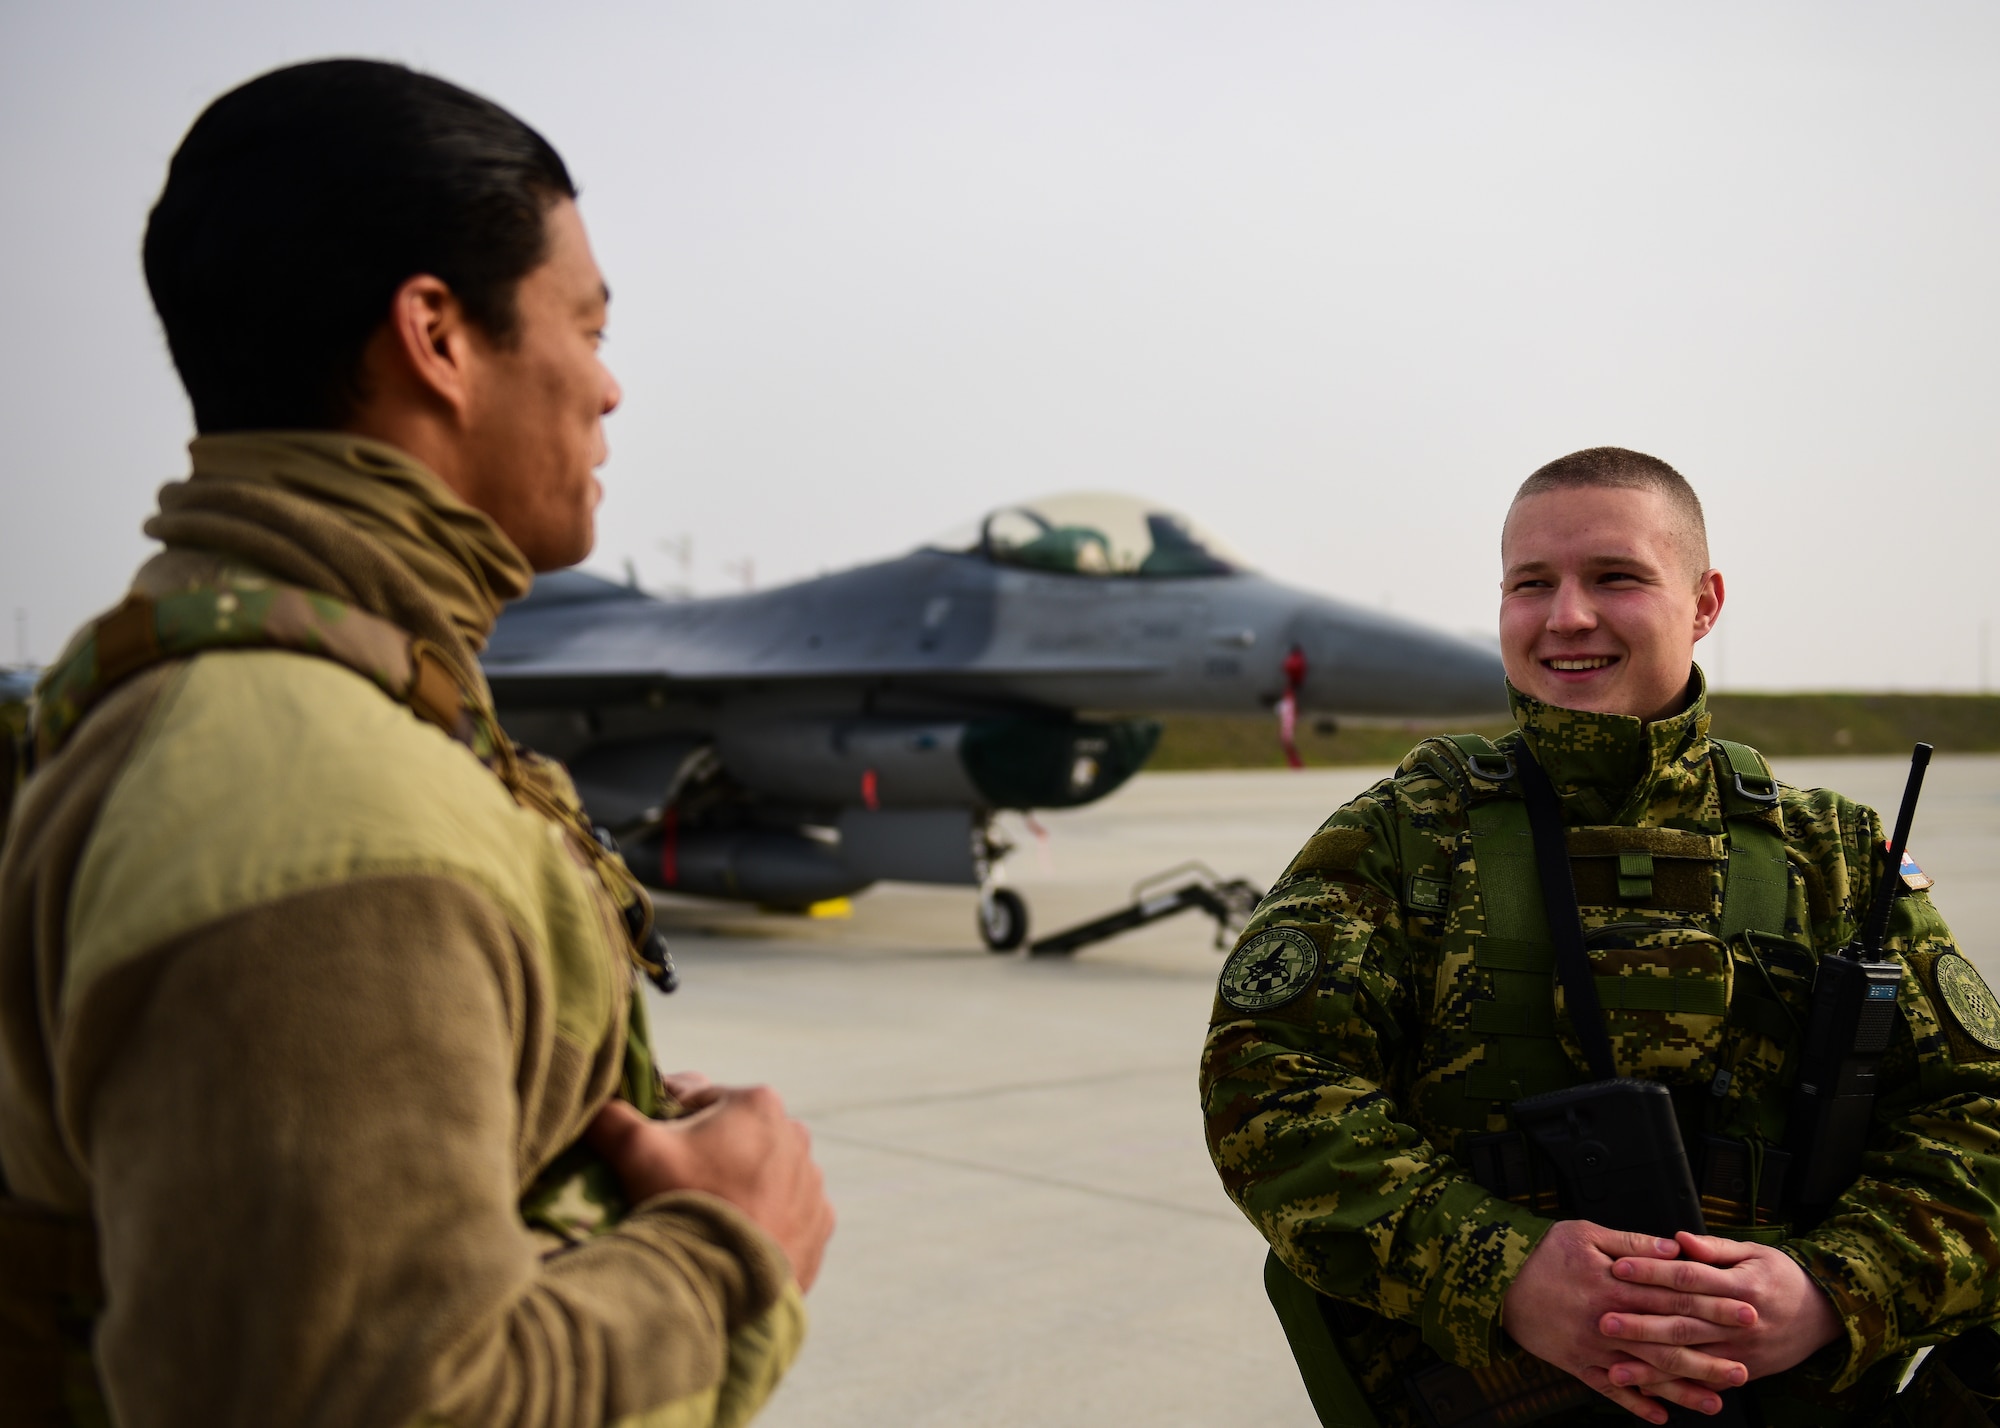 U.S. Air Force Staff Sgt. James Donaldson, 31st Security Forces Squadron response team leader, from the 31st Fighter Wing, Aviano Air Base, Italy, engages in conversation with Croatian Air Force Soldier Din Begulic, 191st Ela-Fighter Jet Unit while standing guard in front of a U.S. Air Force F-16C Fighting Falcon, while it receives routine maintenance for Agile Combat Employment operations at Croatia’s 91st Air Base at Pleso, March 17, 2022. The 31st FW executed ACE operations with Croatian Allies. Missions such as these enhance the readiness necessary to respond to any potential challenge in Southeast Europe. (U.S. Air Force photo by Tech. Sgt. Miquel Jordan)